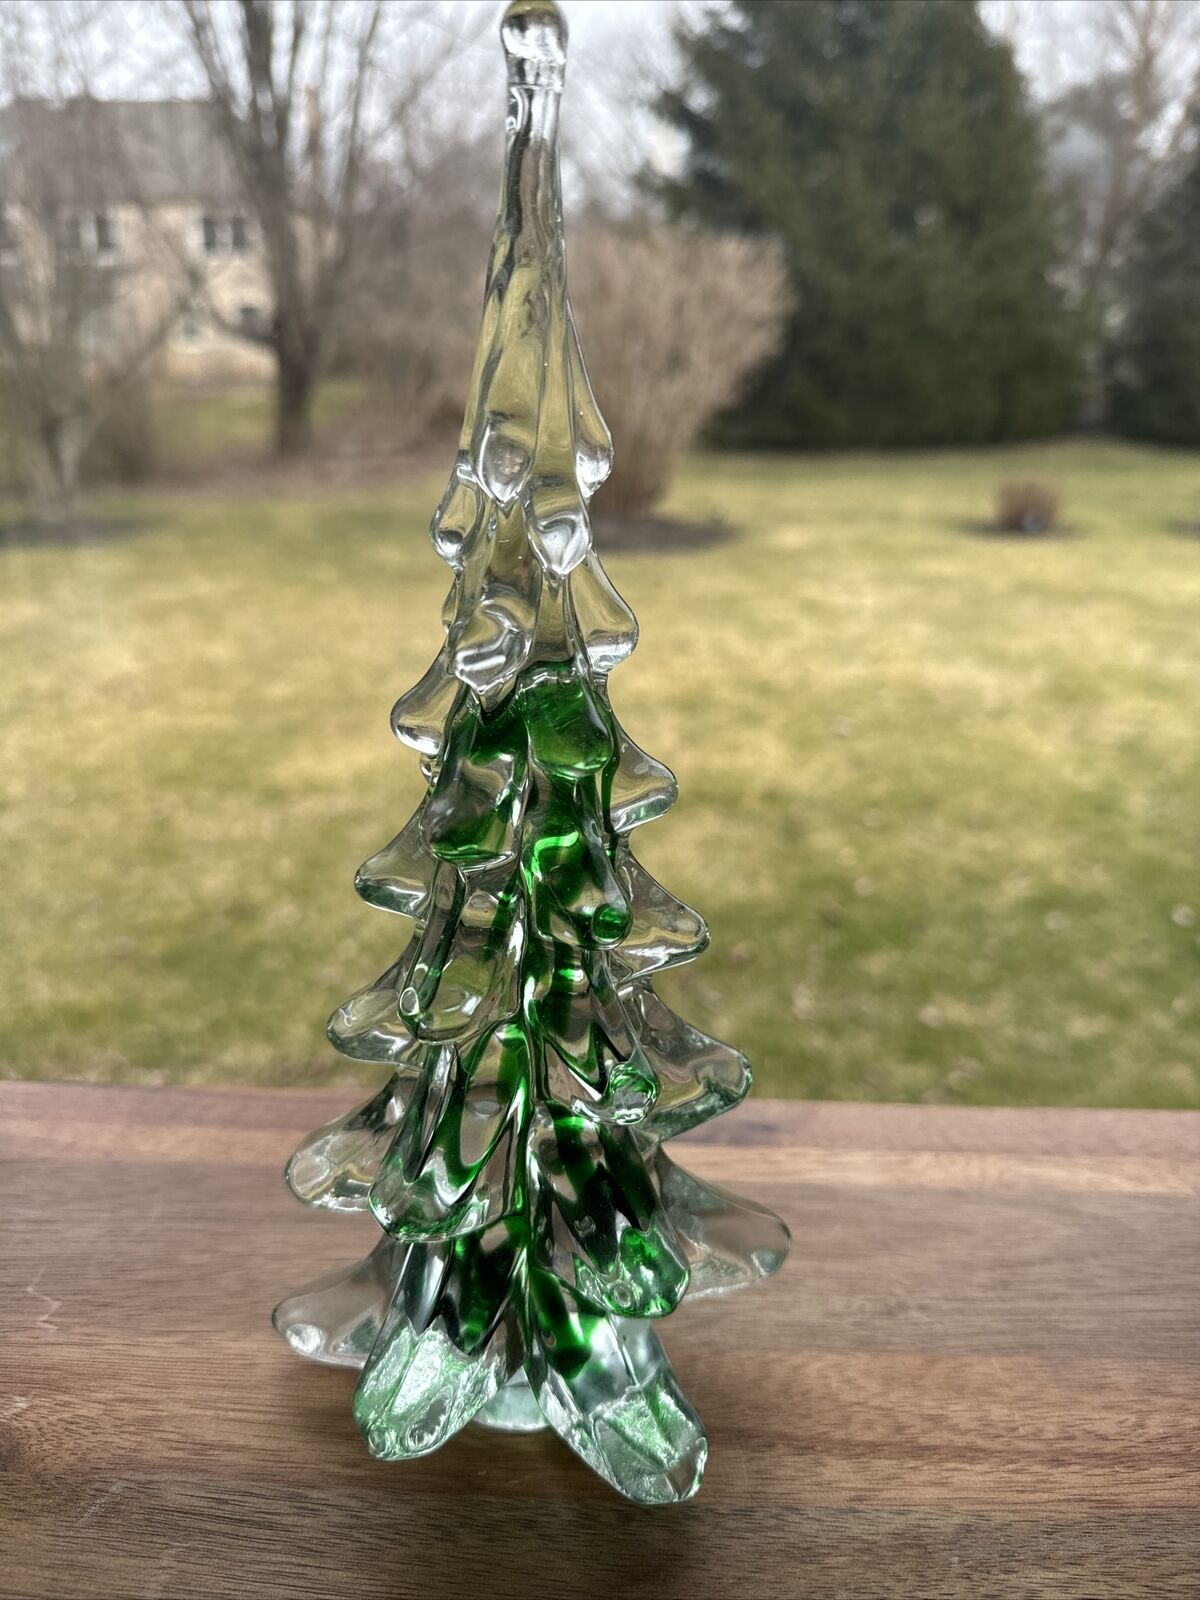 Vintage Green Glass Christmas Tree 10””Tall & Weight 2.1 Lb